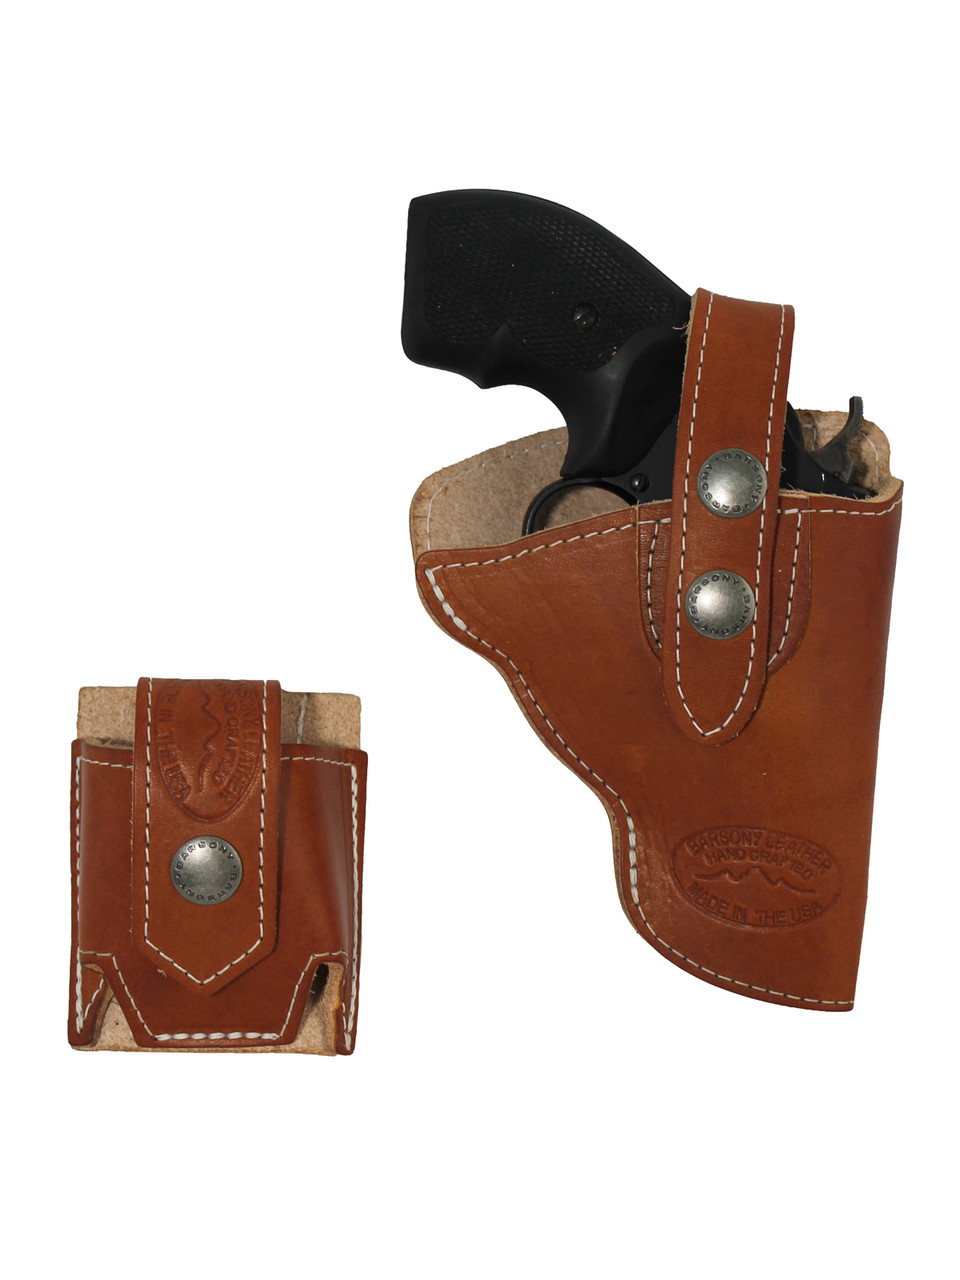 Saddle Tan Leather OWB Holster + Speed-loader Pouch for Snub Nose 2" Revolvers